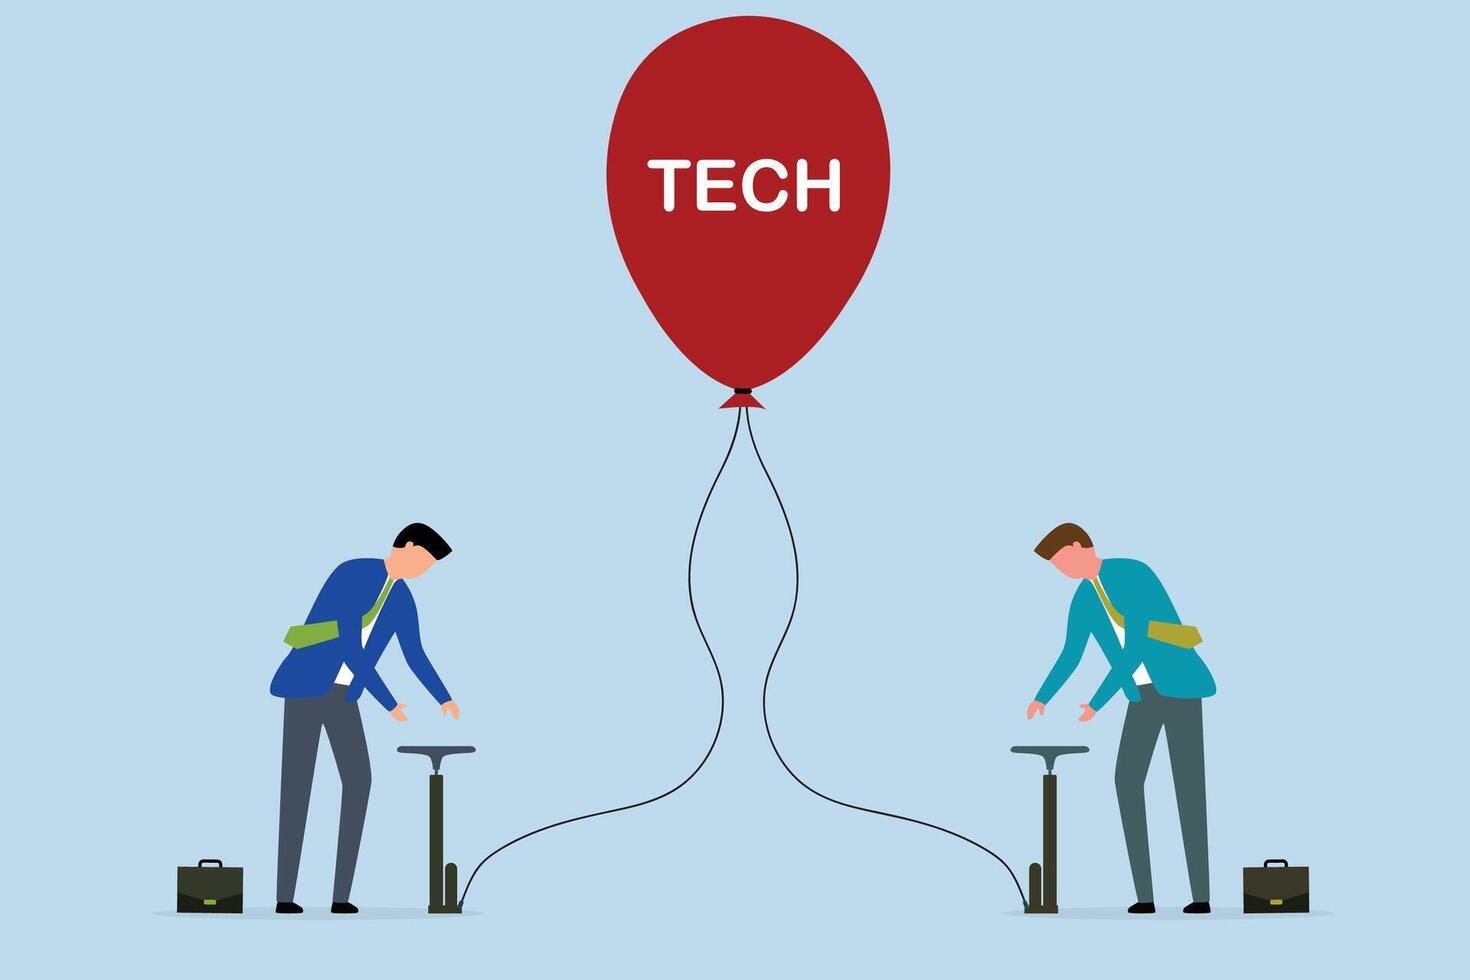 Tech stock bubble, traders investors take risk by inflating ready balloon with word TECH vector